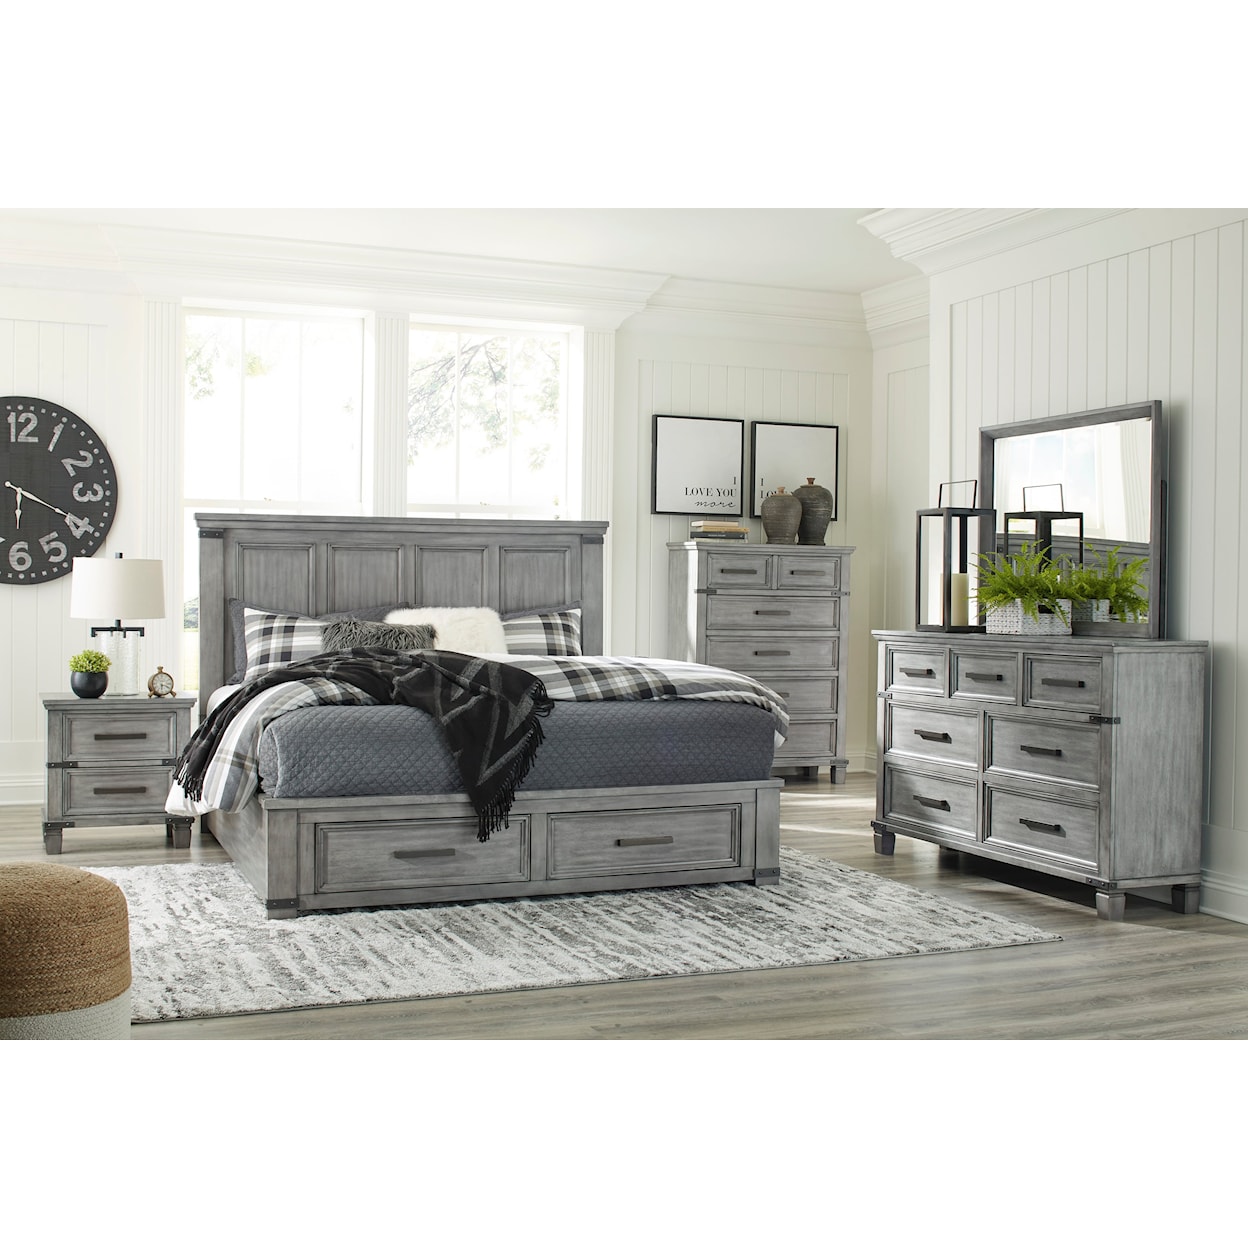 Signature Design by Ashley Russelyn California King Bedroom Set